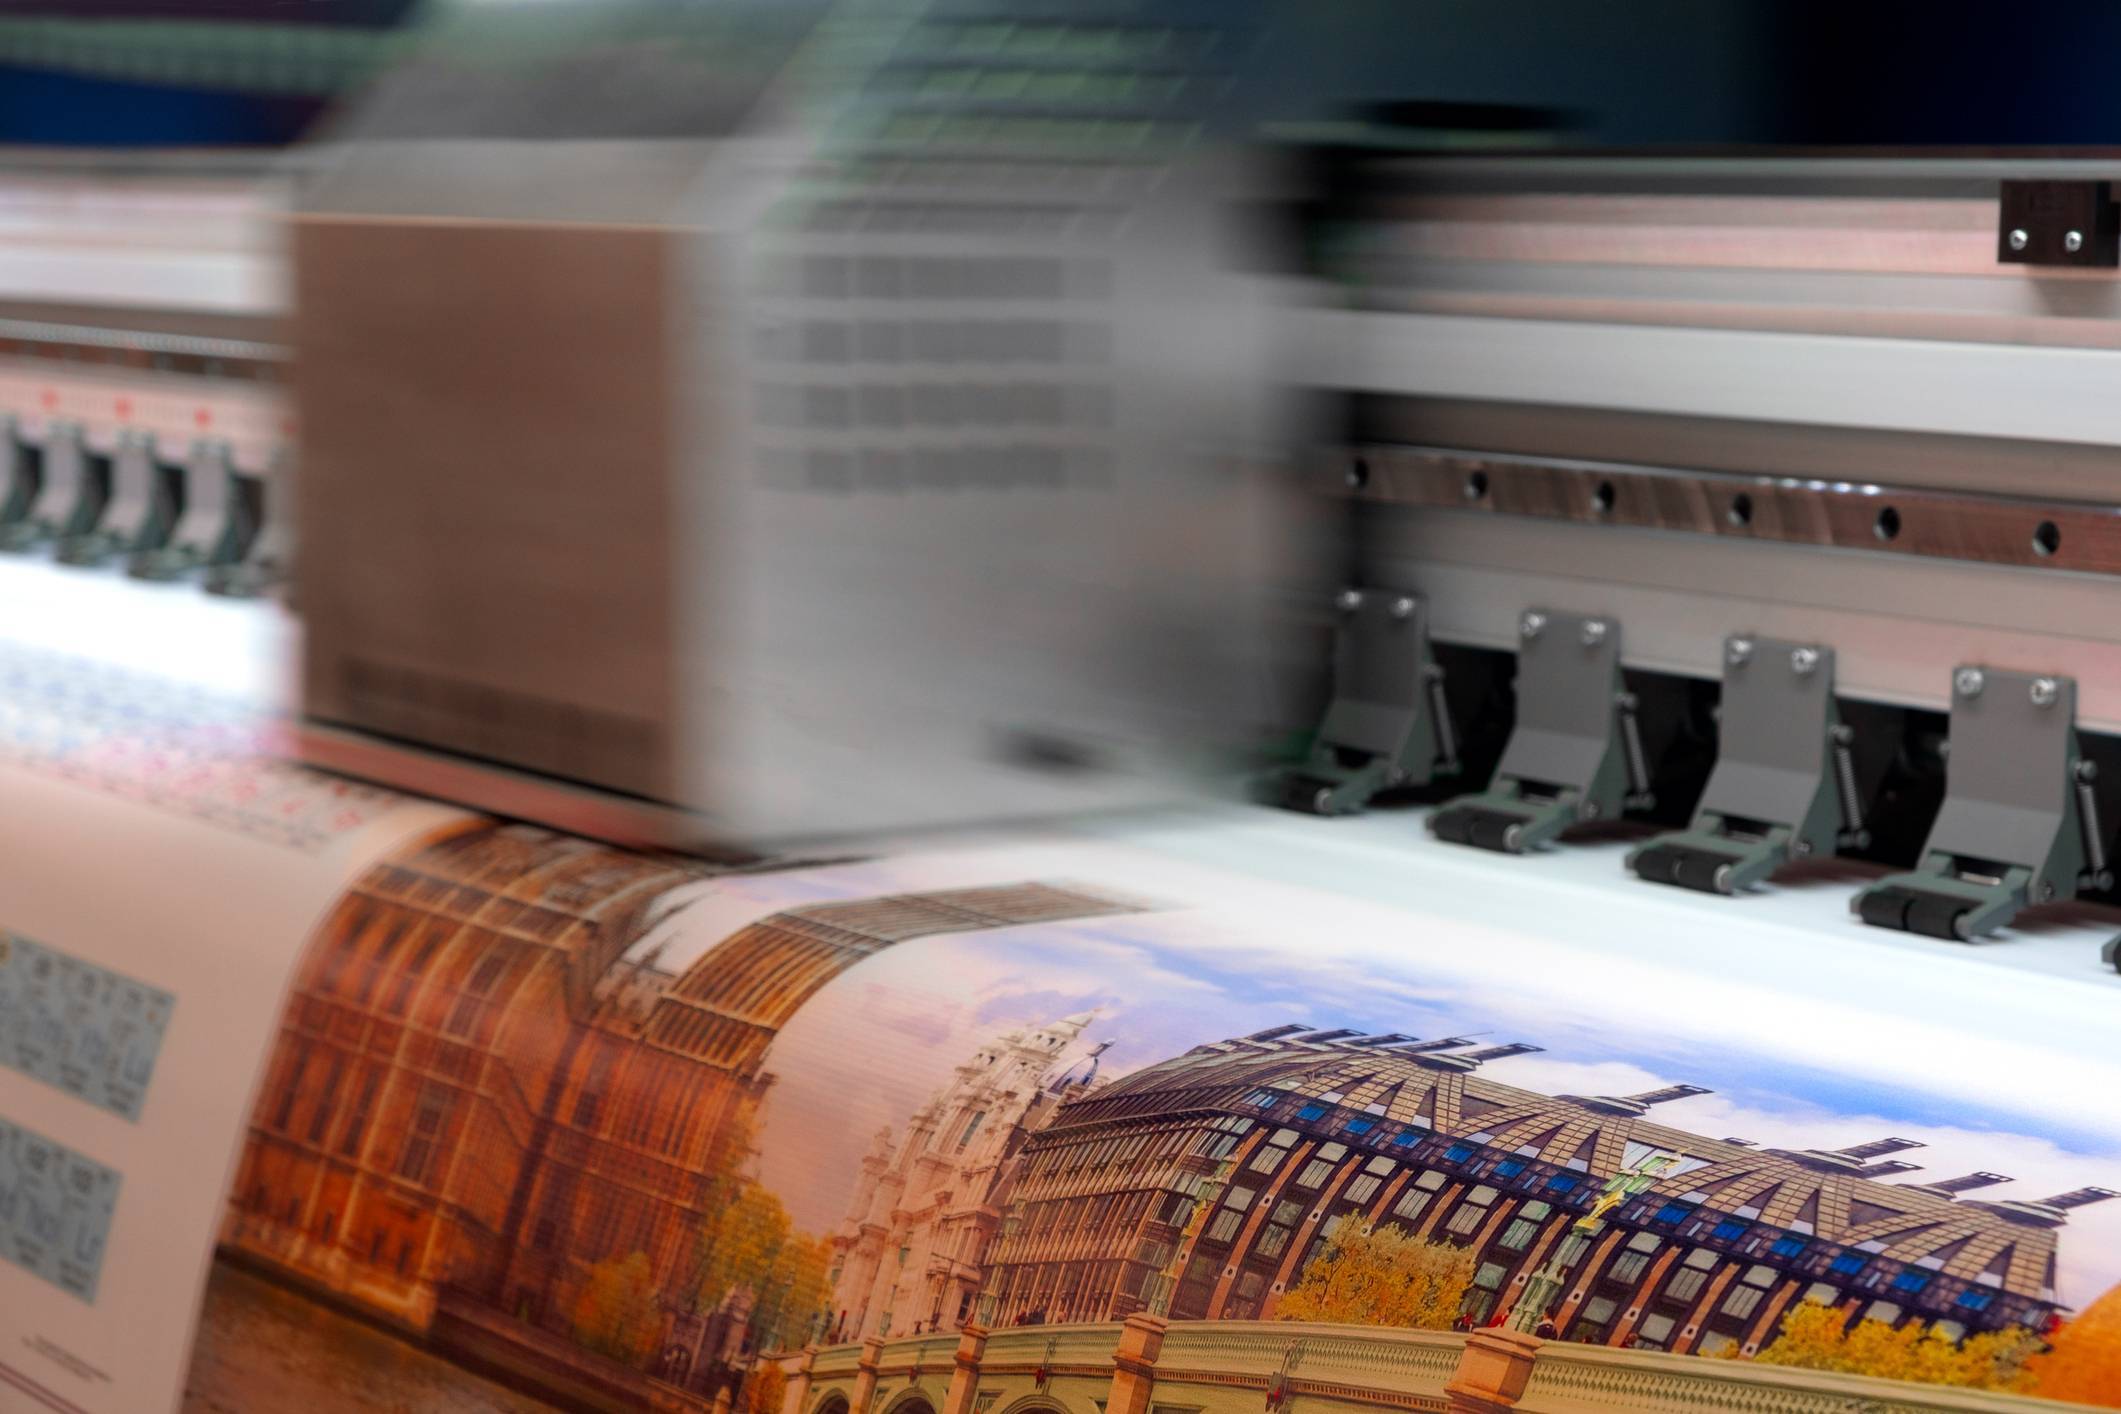 Industrial Digital Textile Printer, DTG Printer, Direct to Fabric